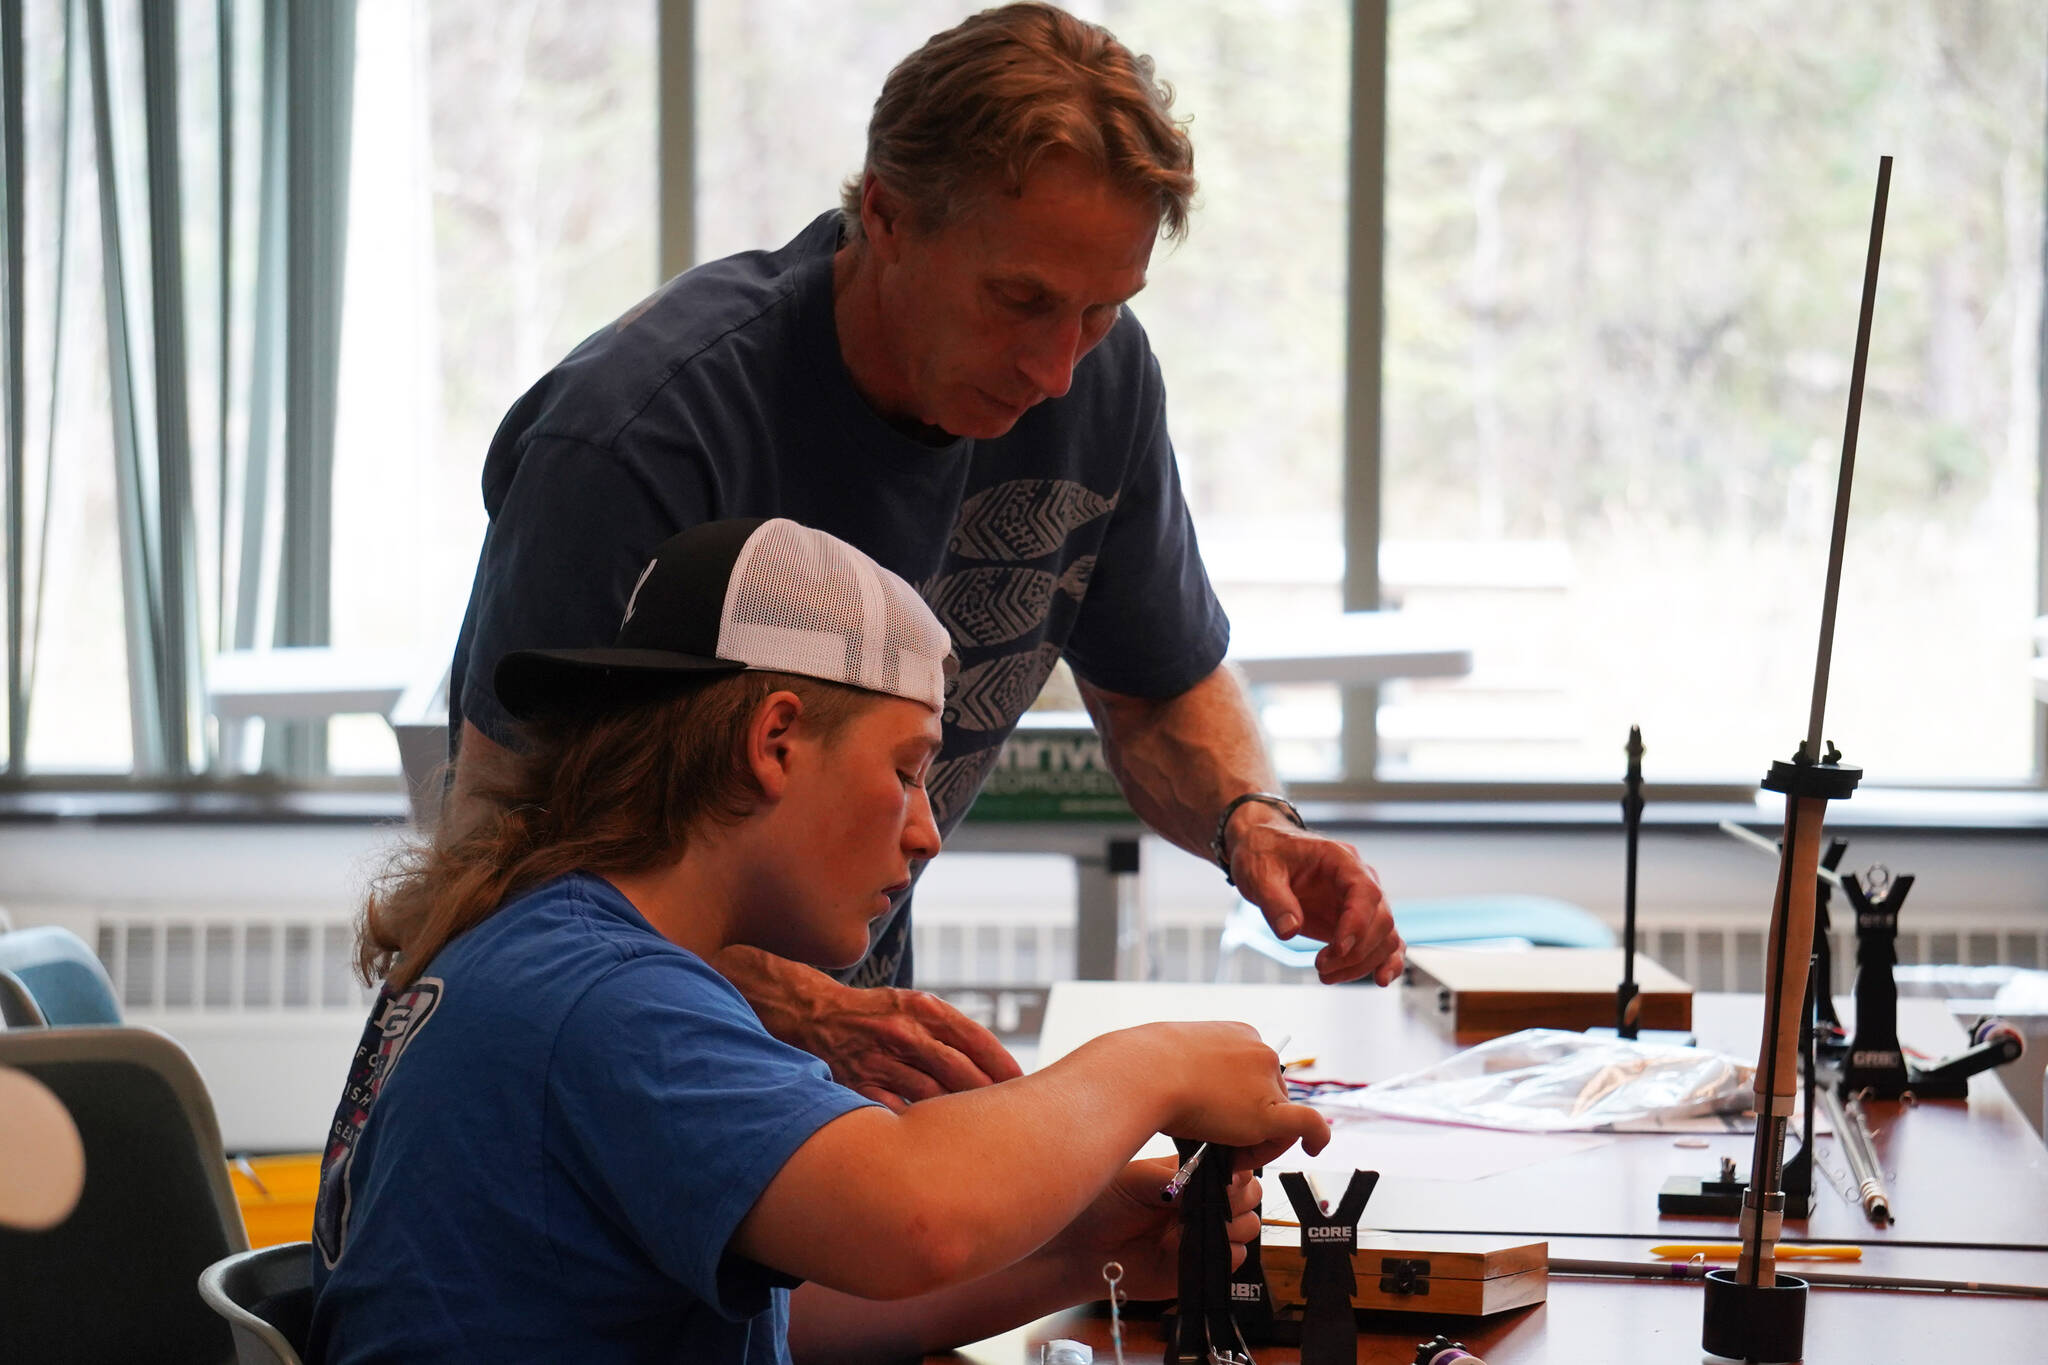 Tony Lewis helps a student with the assembly of a fishing rod during a kids camp put on by Trout Unlimited on Wednesday, May 24, 2023, at the Donald E. Gilman Kenai River Center in Soldotna, Alaska. (Jake Dye/Peninsula Clarion)